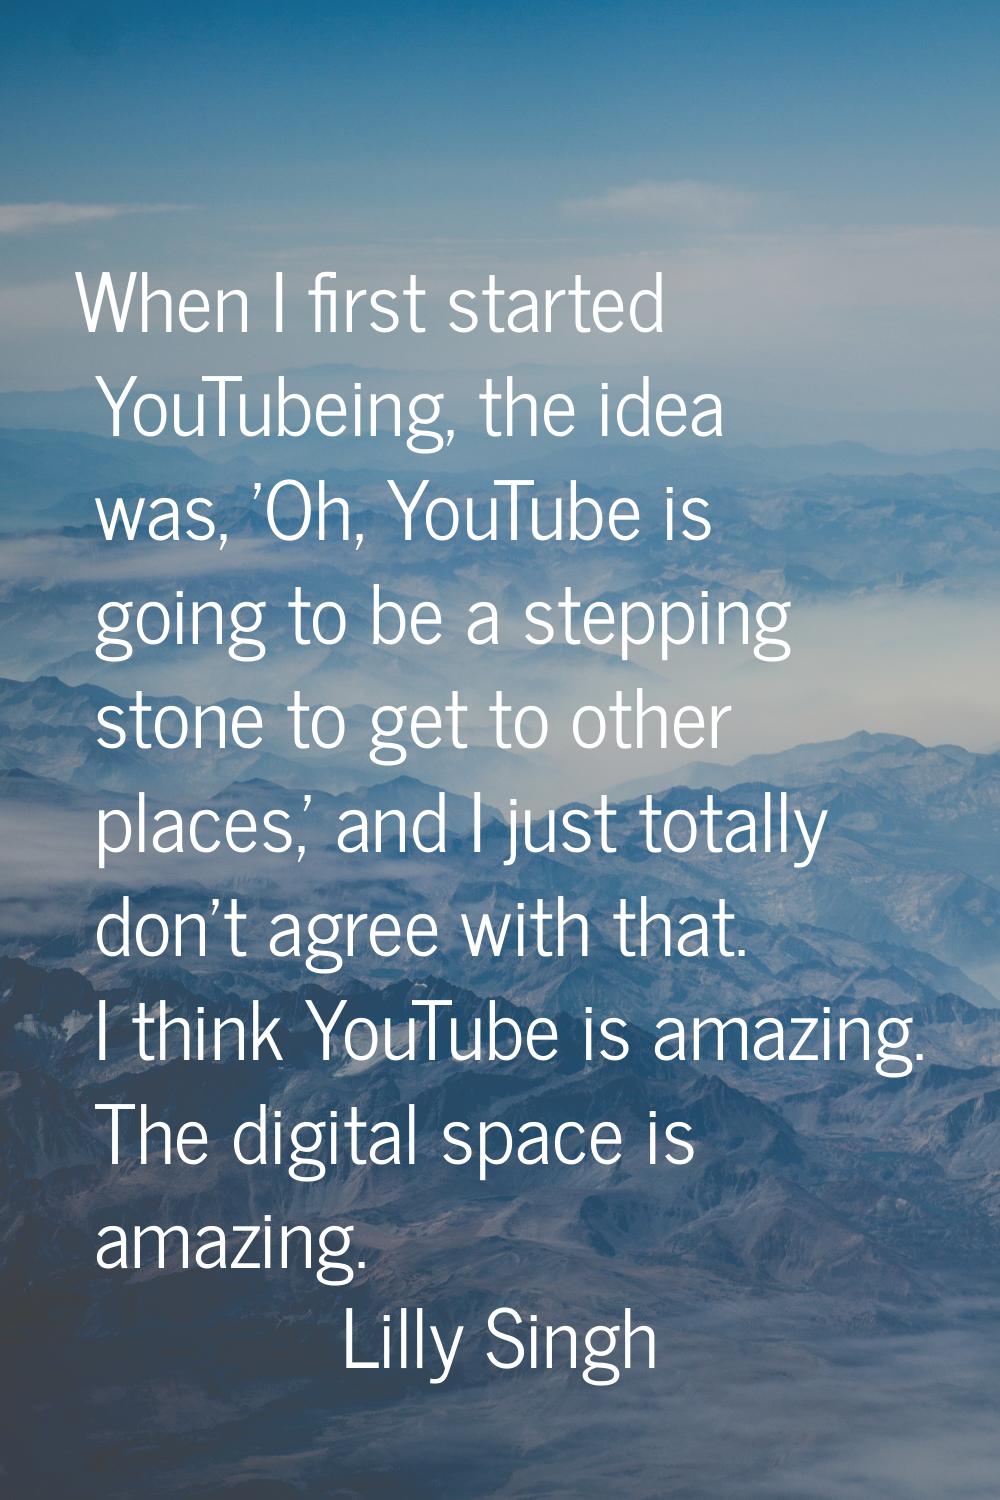 When I first started YouTubeing, the idea was, 'Oh, YouTube is going to be a stepping stone to get 